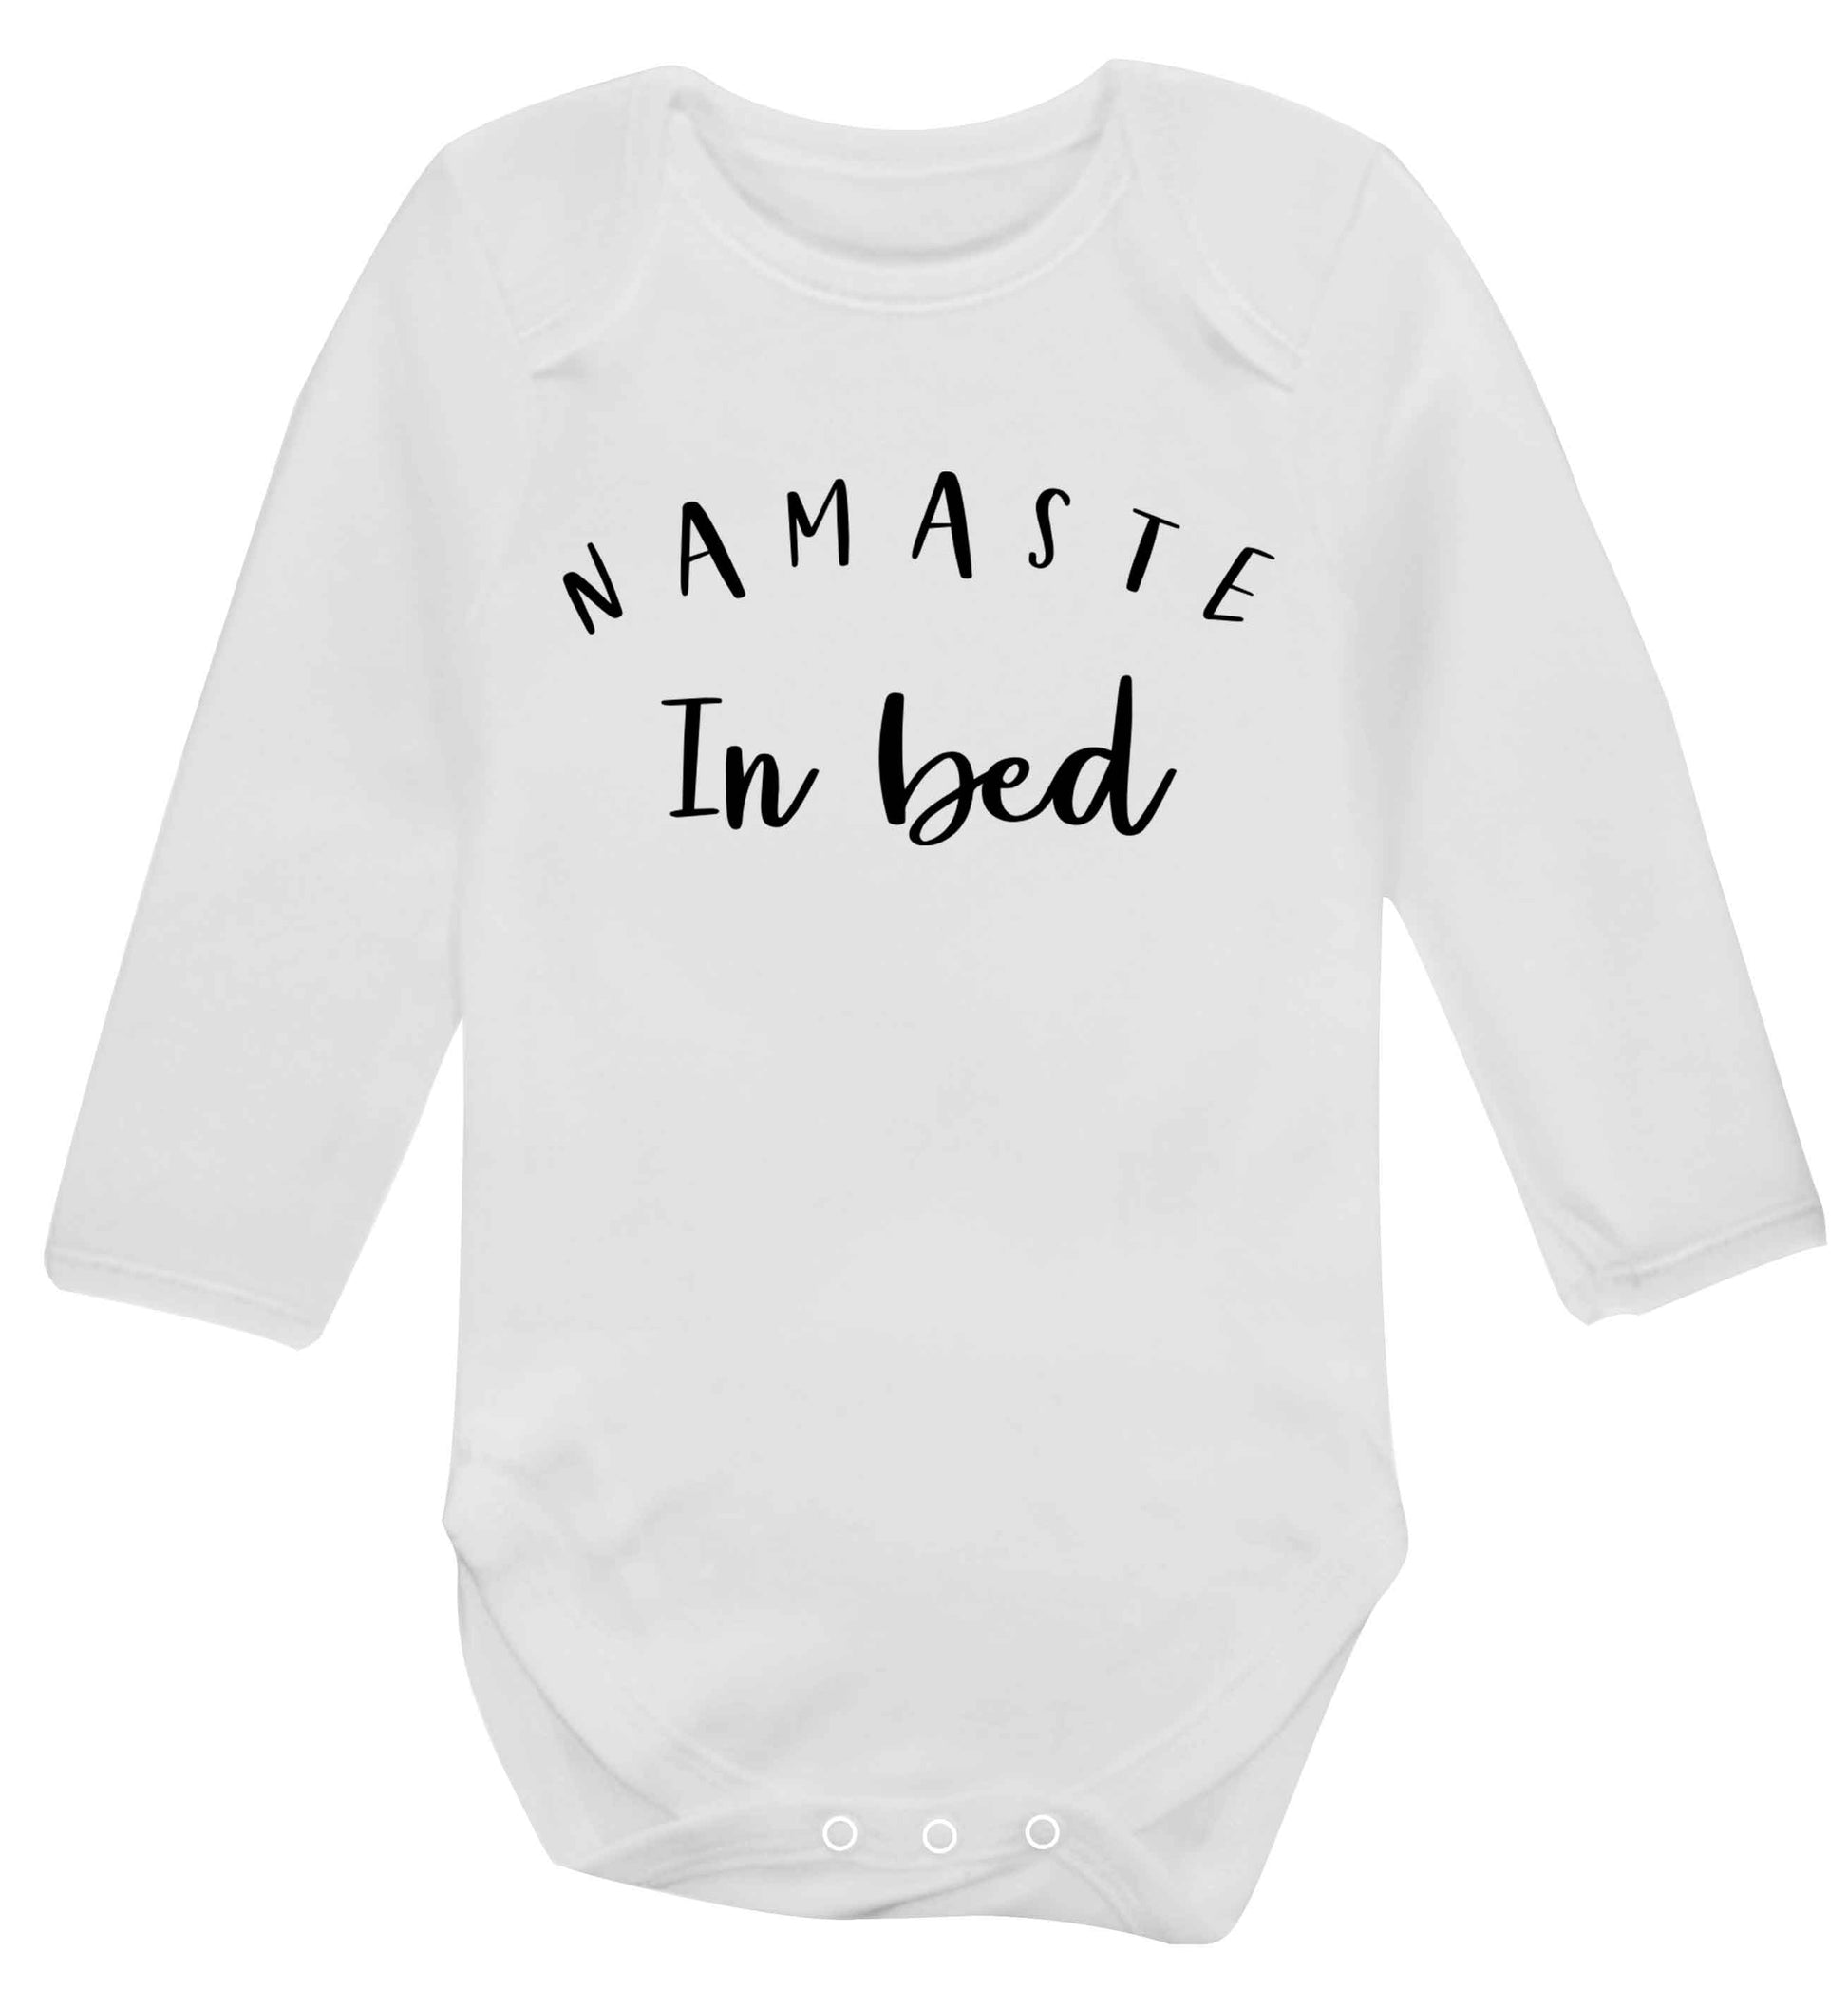 Namaste in bed Baby Vest long sleeved white 6-12 months